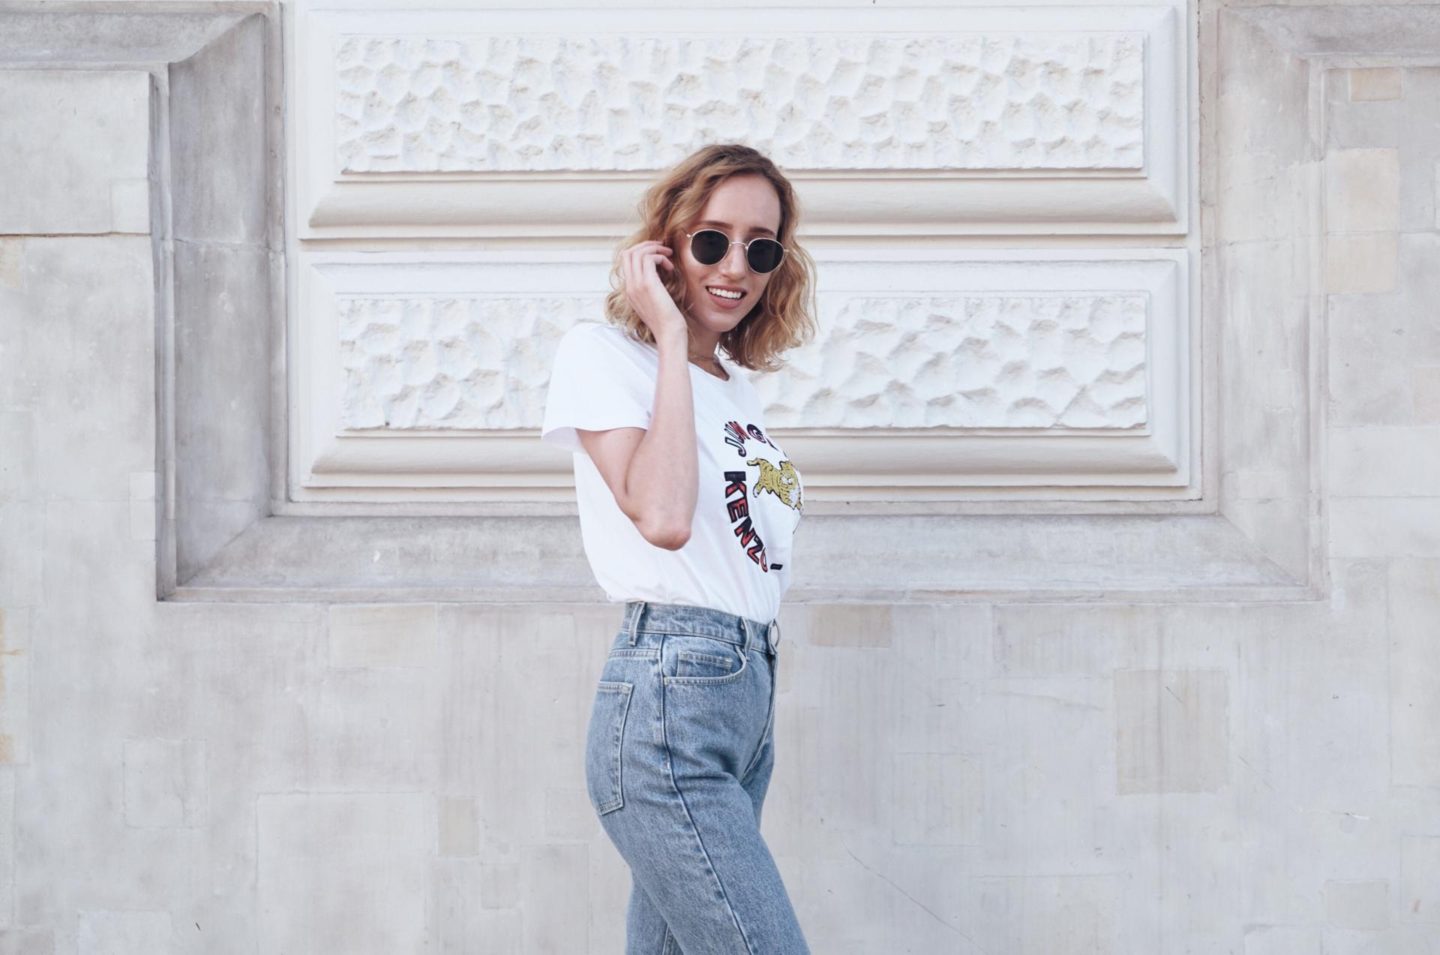 OOTD | My Everyday Look: Jeans & T-Shirt